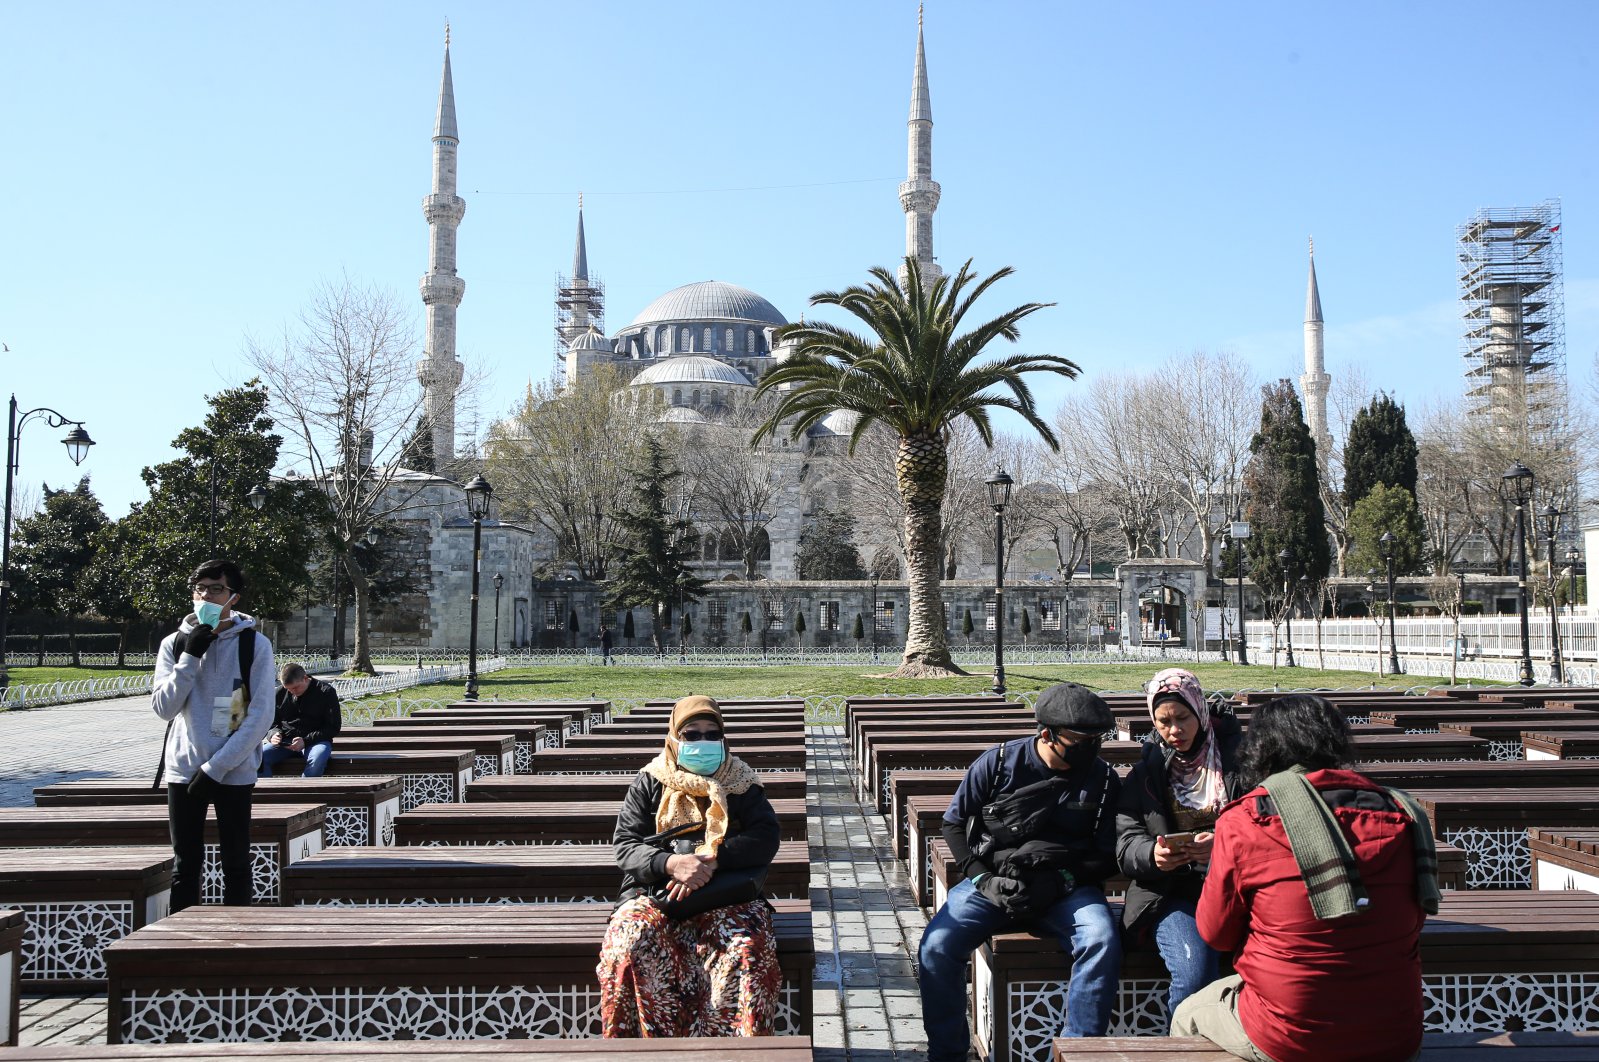 Tourists are seen near Sultanahmet Mosque, also known as the Blue Mosque, during the coronavirus outbreak, Istanbul, Turkey, March 21, 2020. (AA Photo)